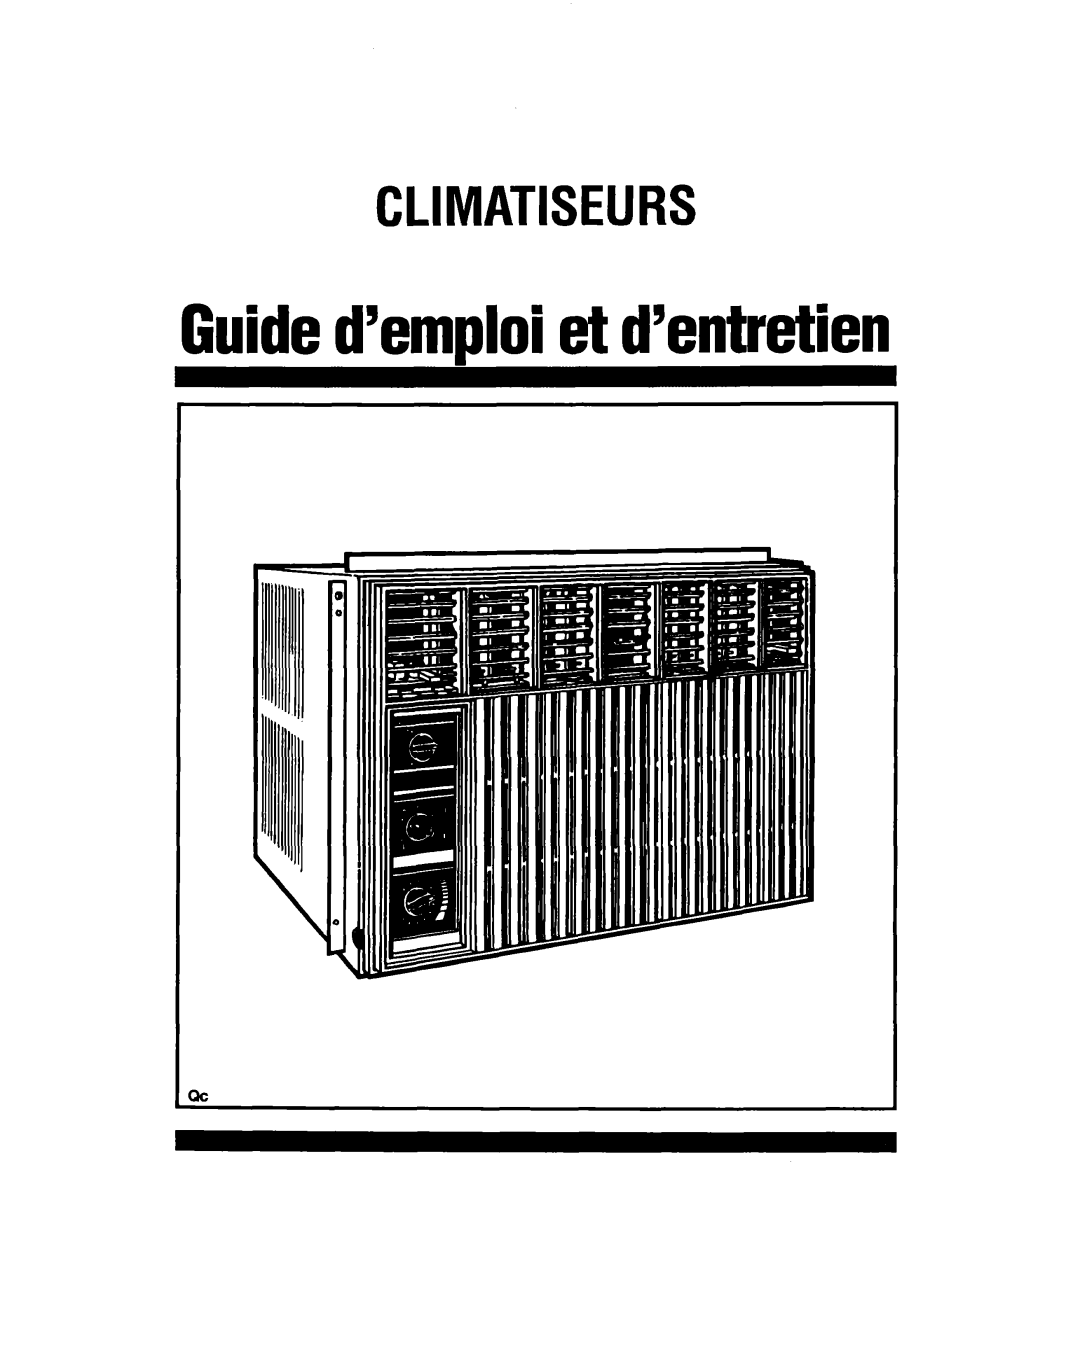 Whirlpool CA13WQ4 manual Climatiseurs, Guided’emMoiet d’entretien 